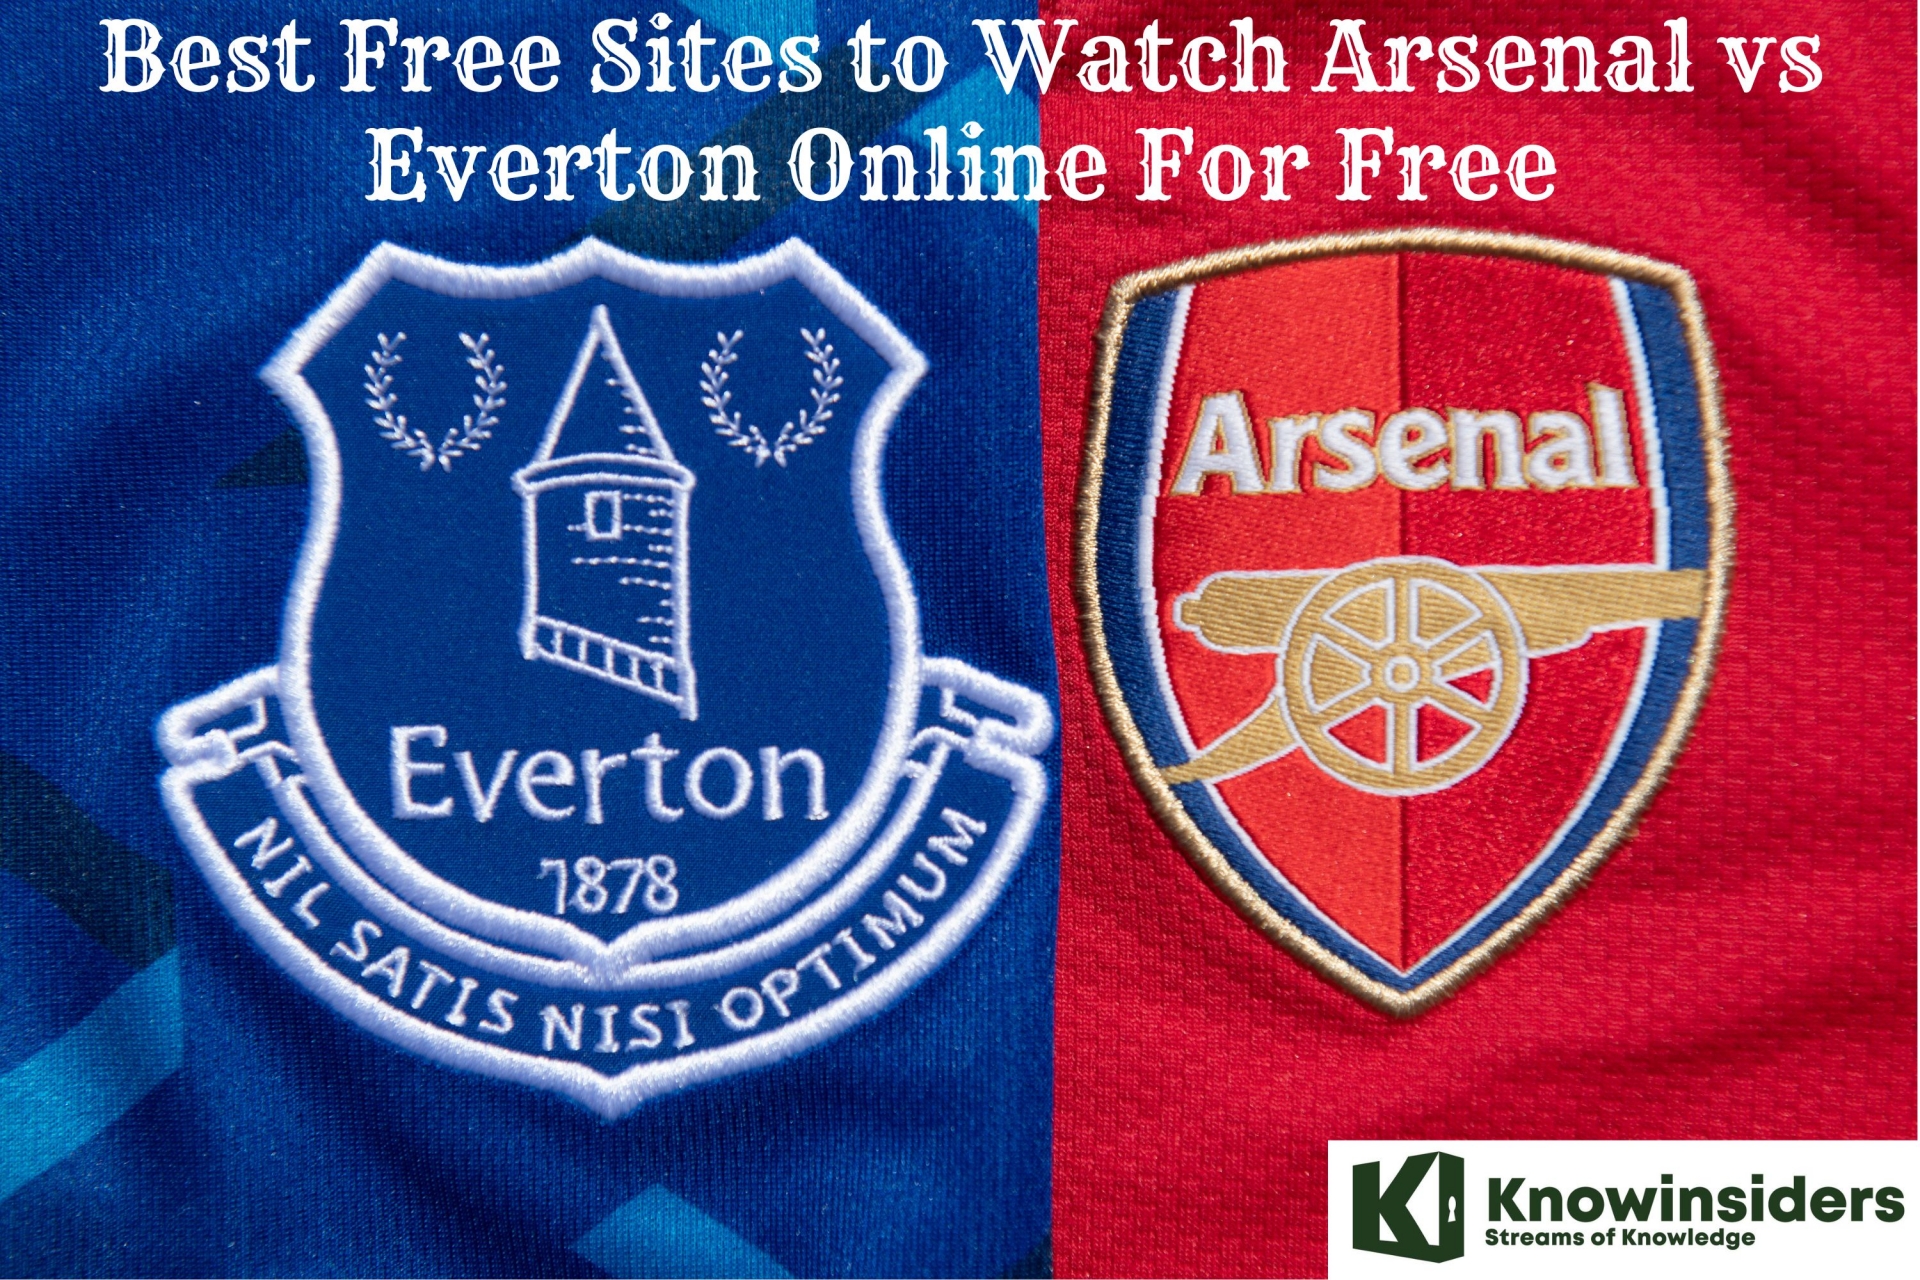 Best Free Sites to Watch Arsenal vs Everton Online